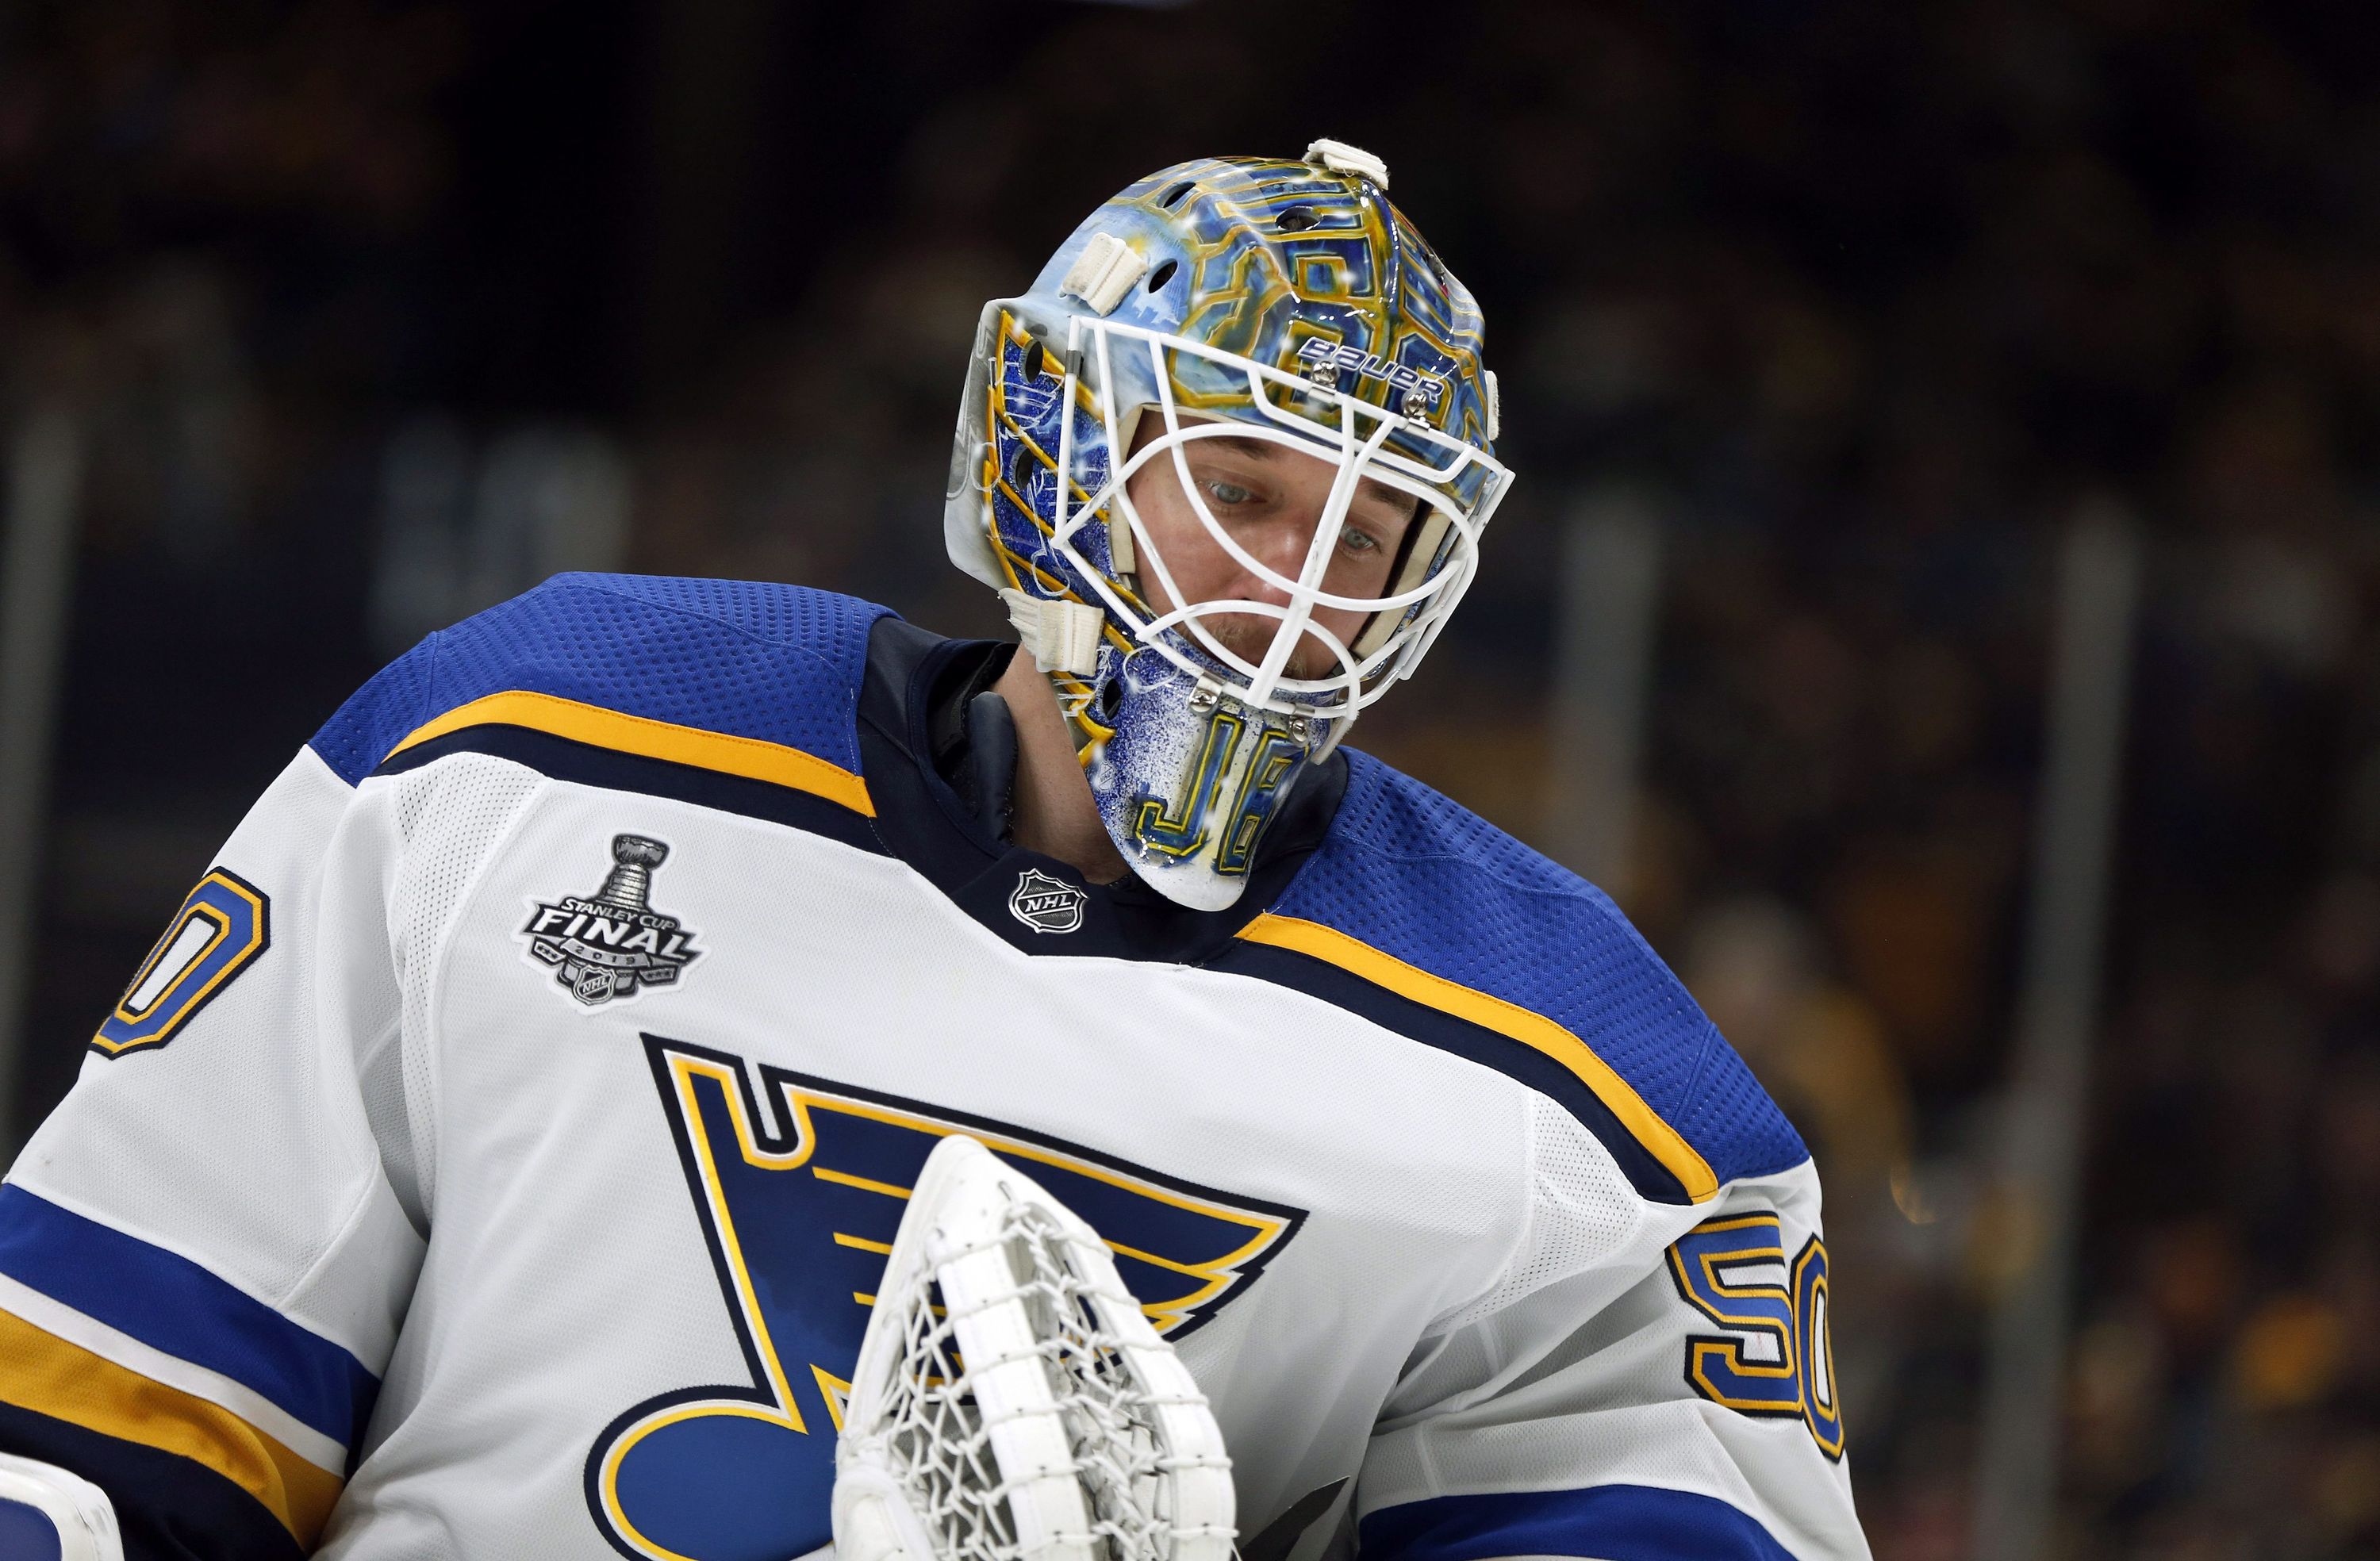 NHL - New Division = New Mask Jordan Binnington is going to be